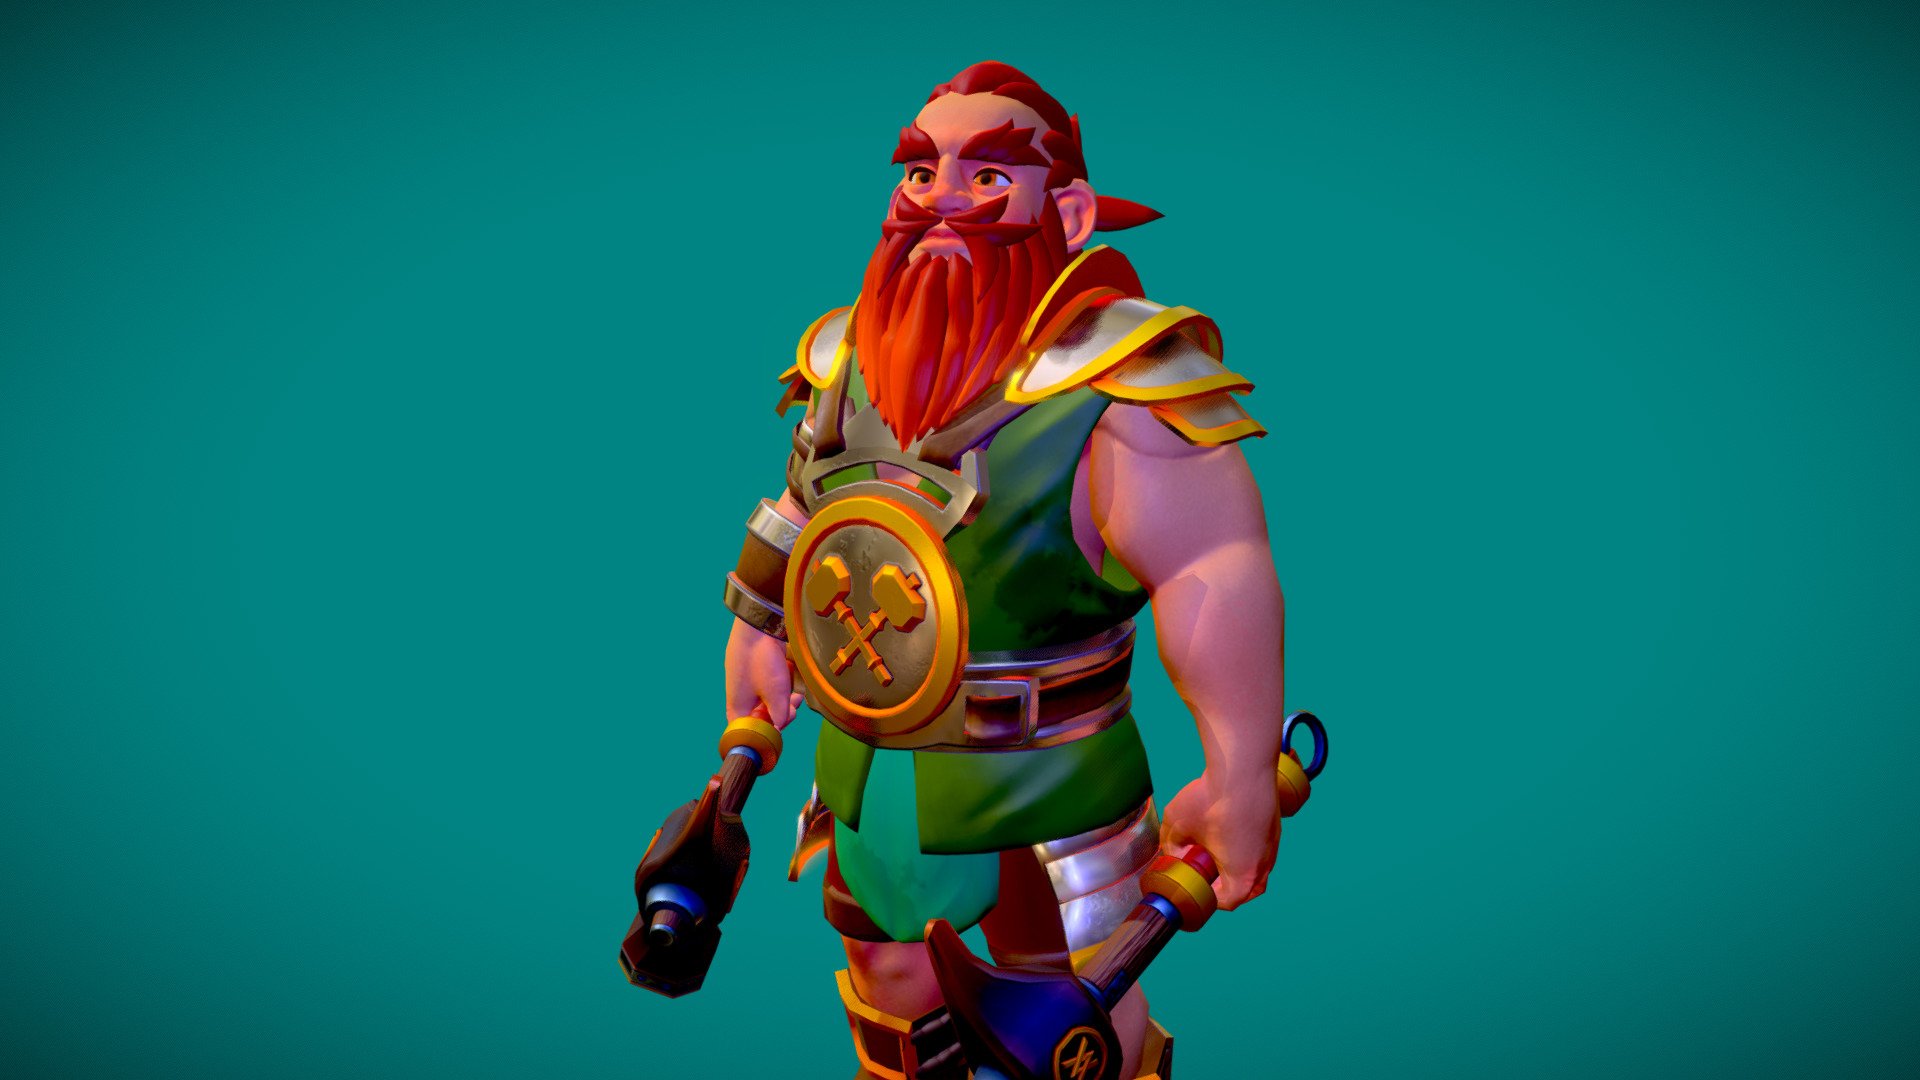 Stylized Dwarven character made with Blender and Substance Painter.
Made to experiment with clothing and stylized hair 3d model